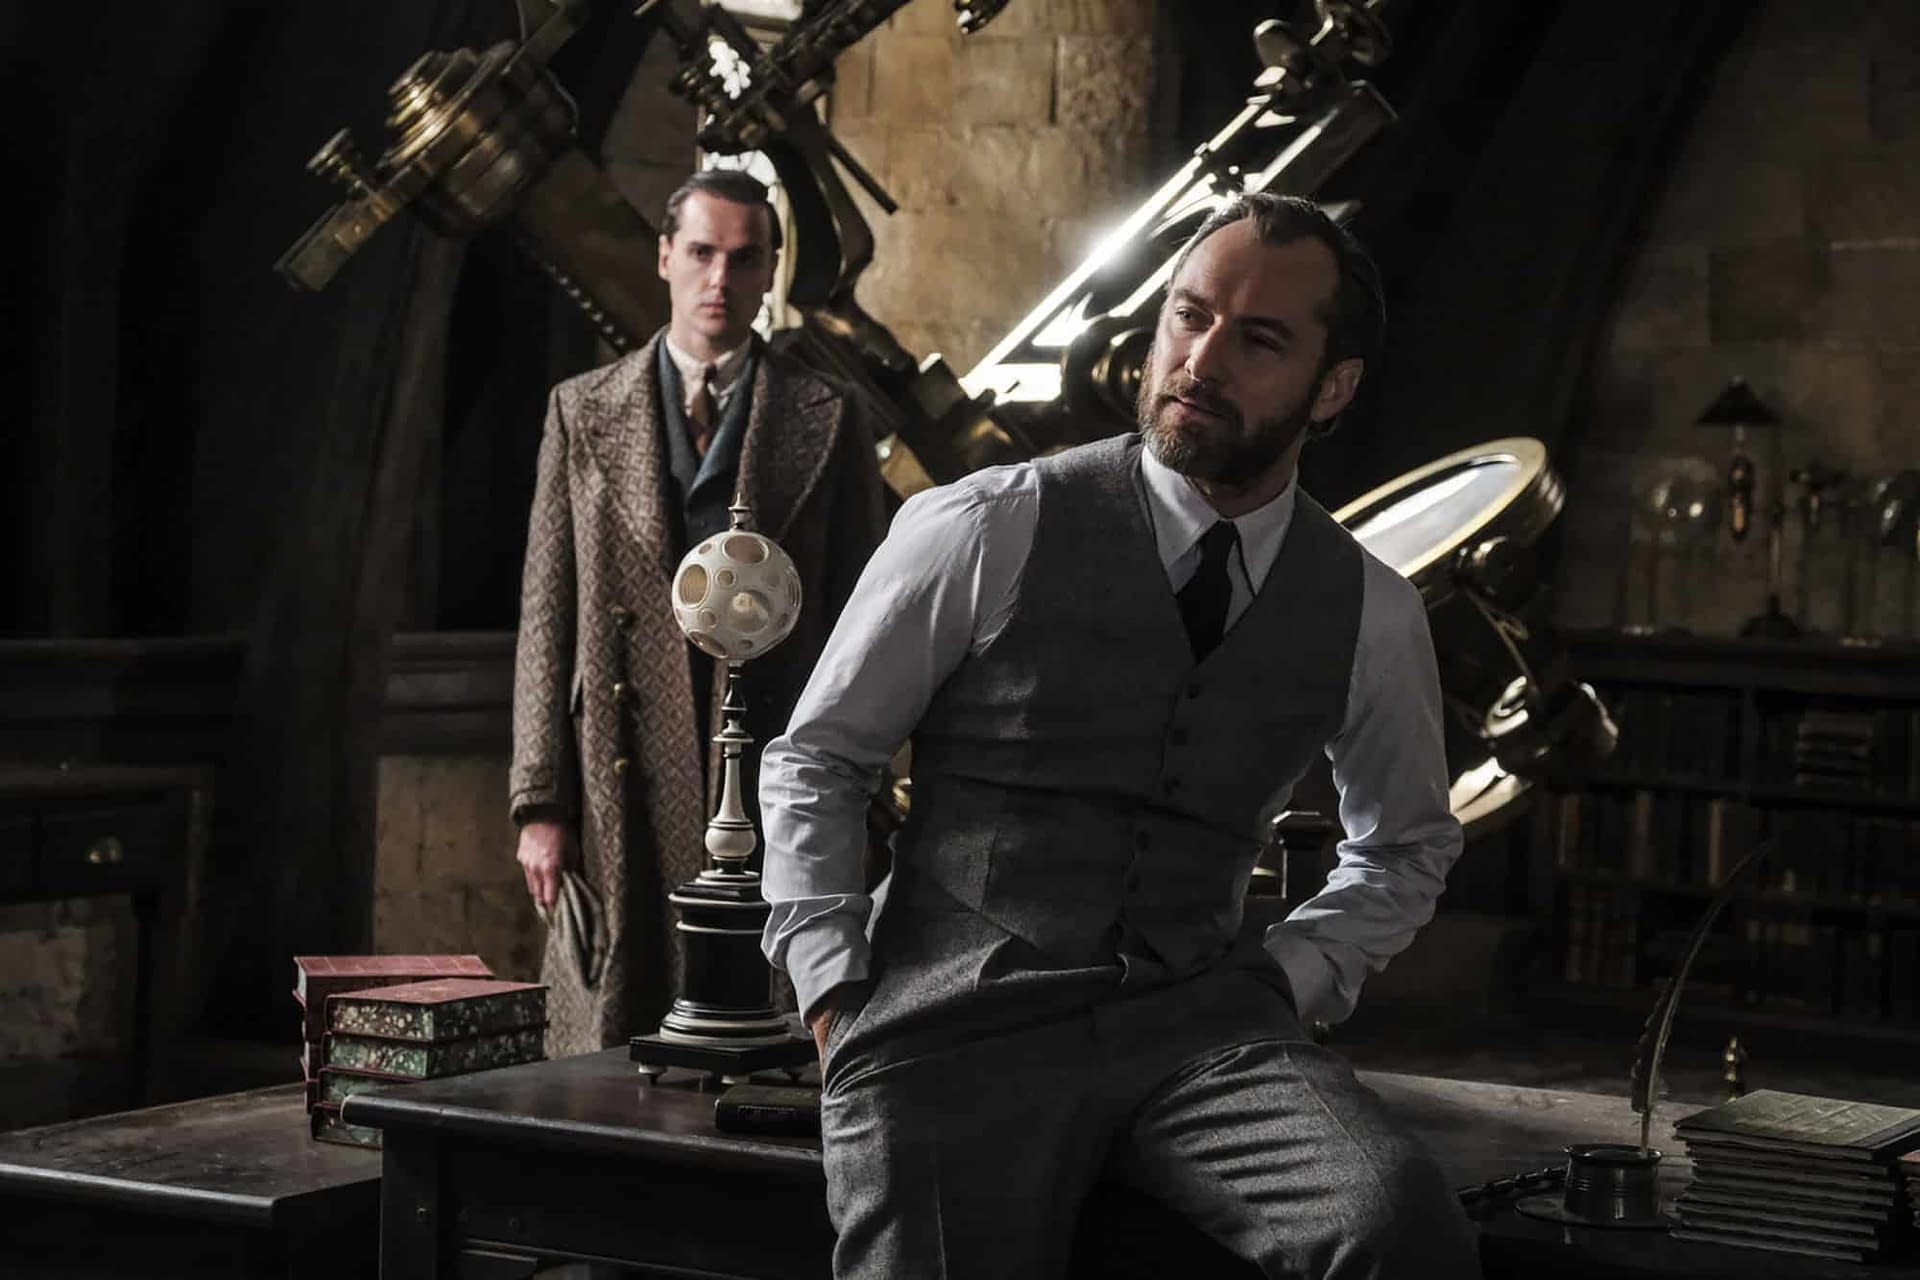 Jude Law: There's a Dash of Anarchy and a Sense of Mystery in Young Dumbledore